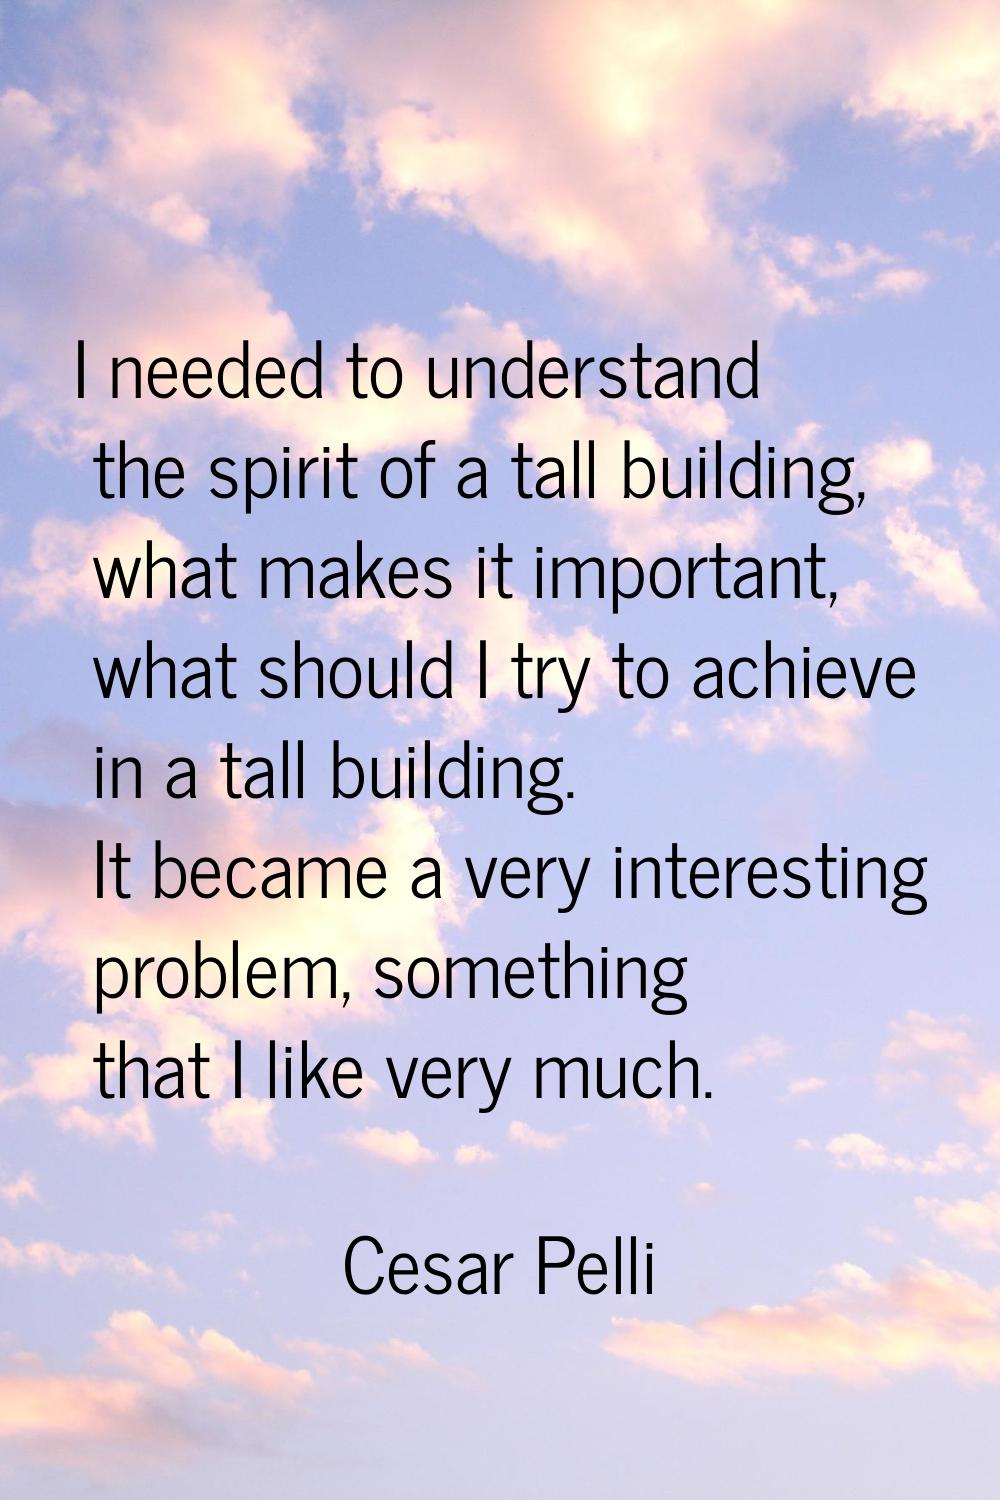 I needed to understand the spirit of a tall building, what makes it important, what should I try to